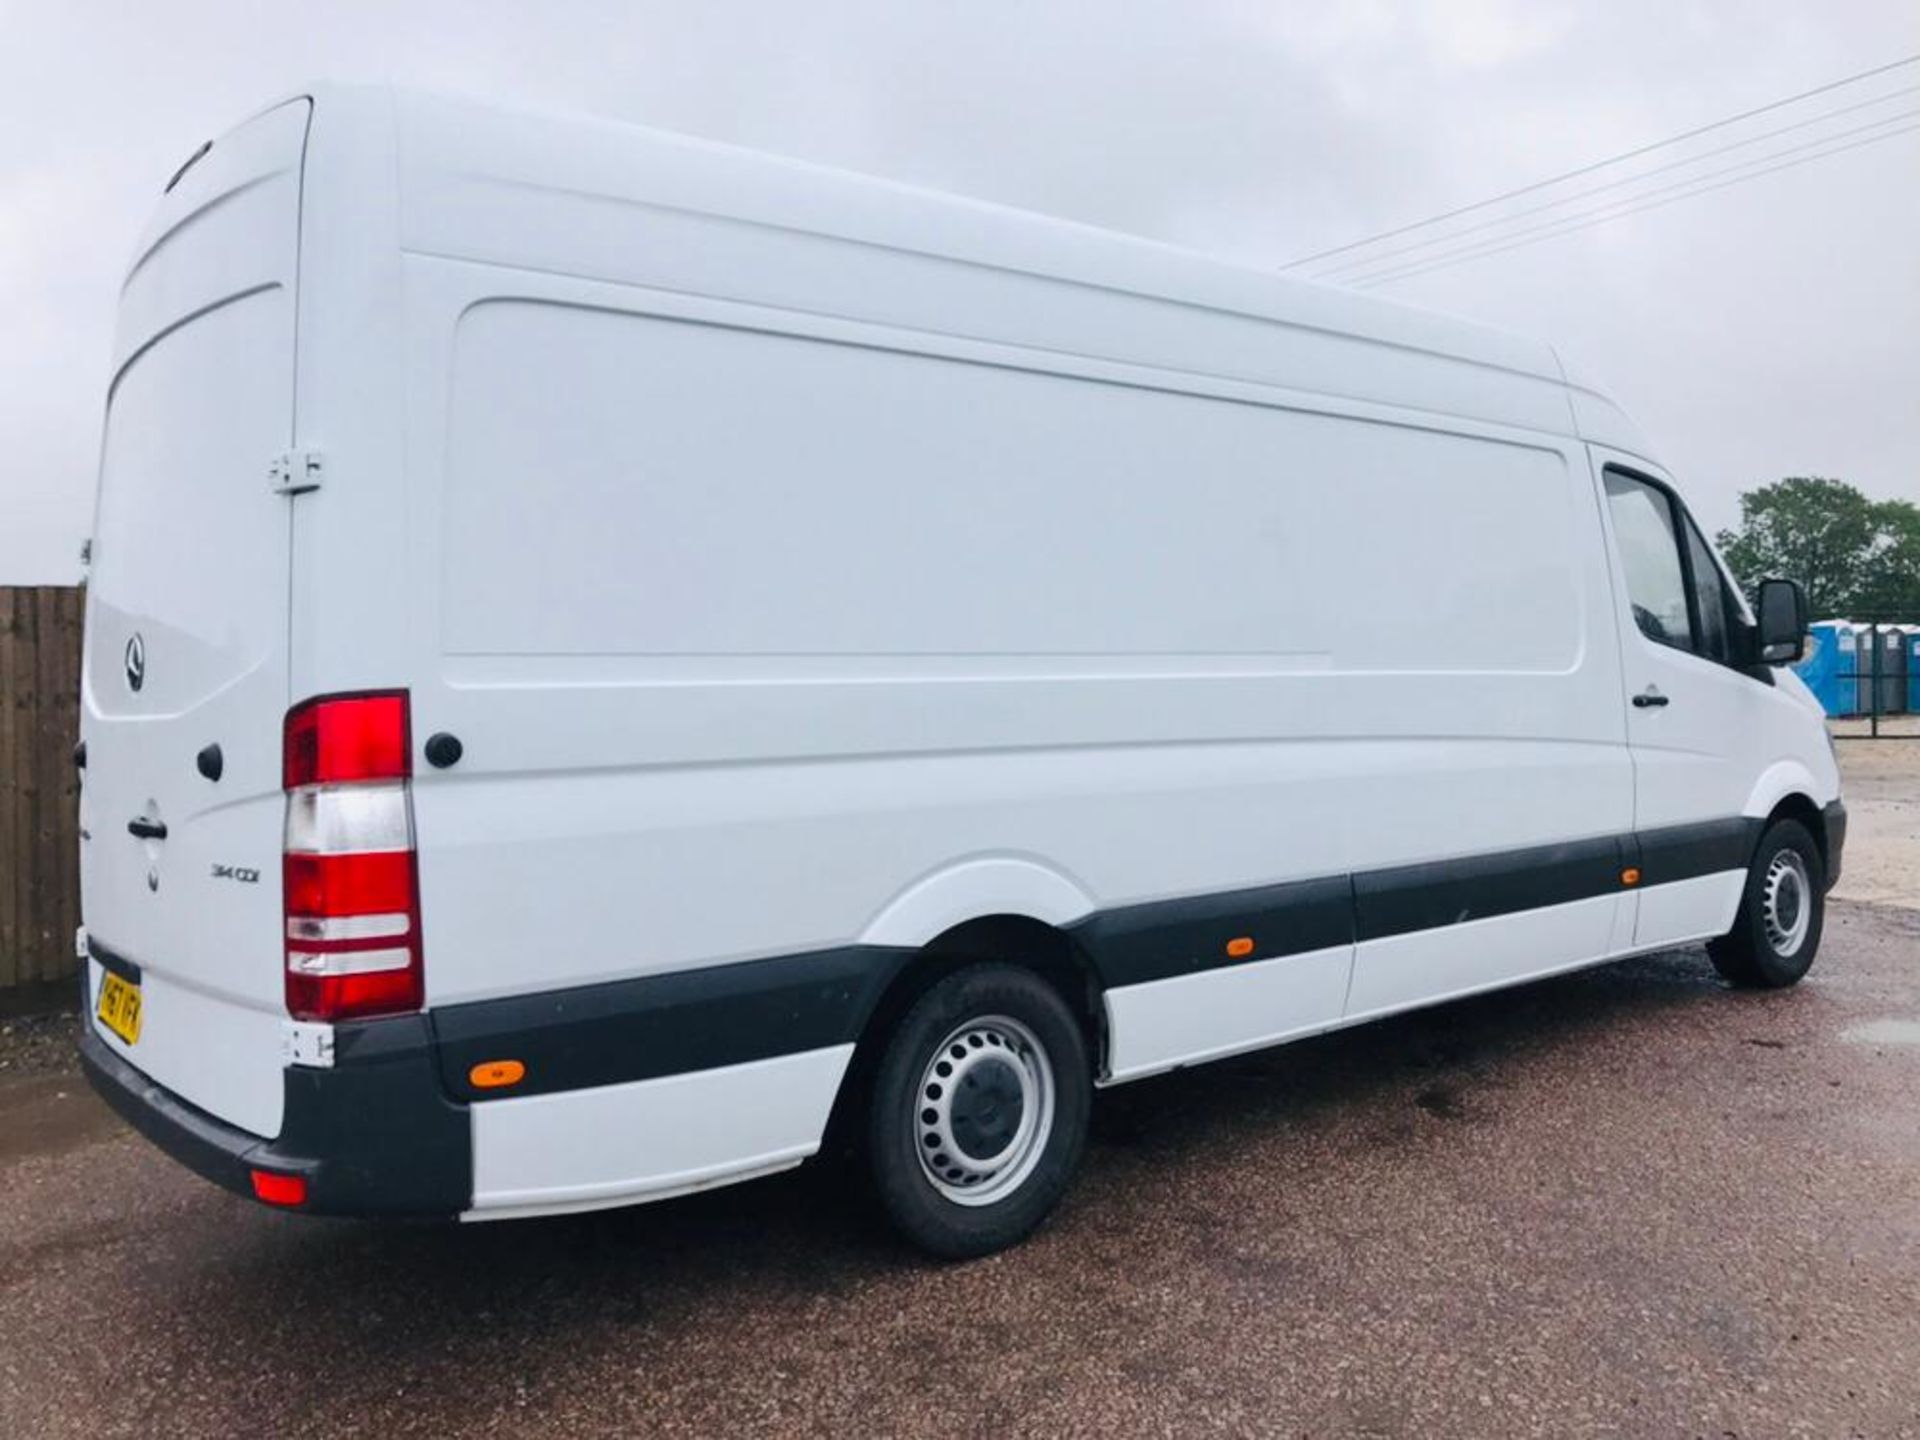 (ON SALE) MERCEDES SPRINTER 314CDI "140BHP" LWB (2018 MODEL) EURO 6 - LONDON COMPLIANT-DONT MISS OUT - Image 8 of 19